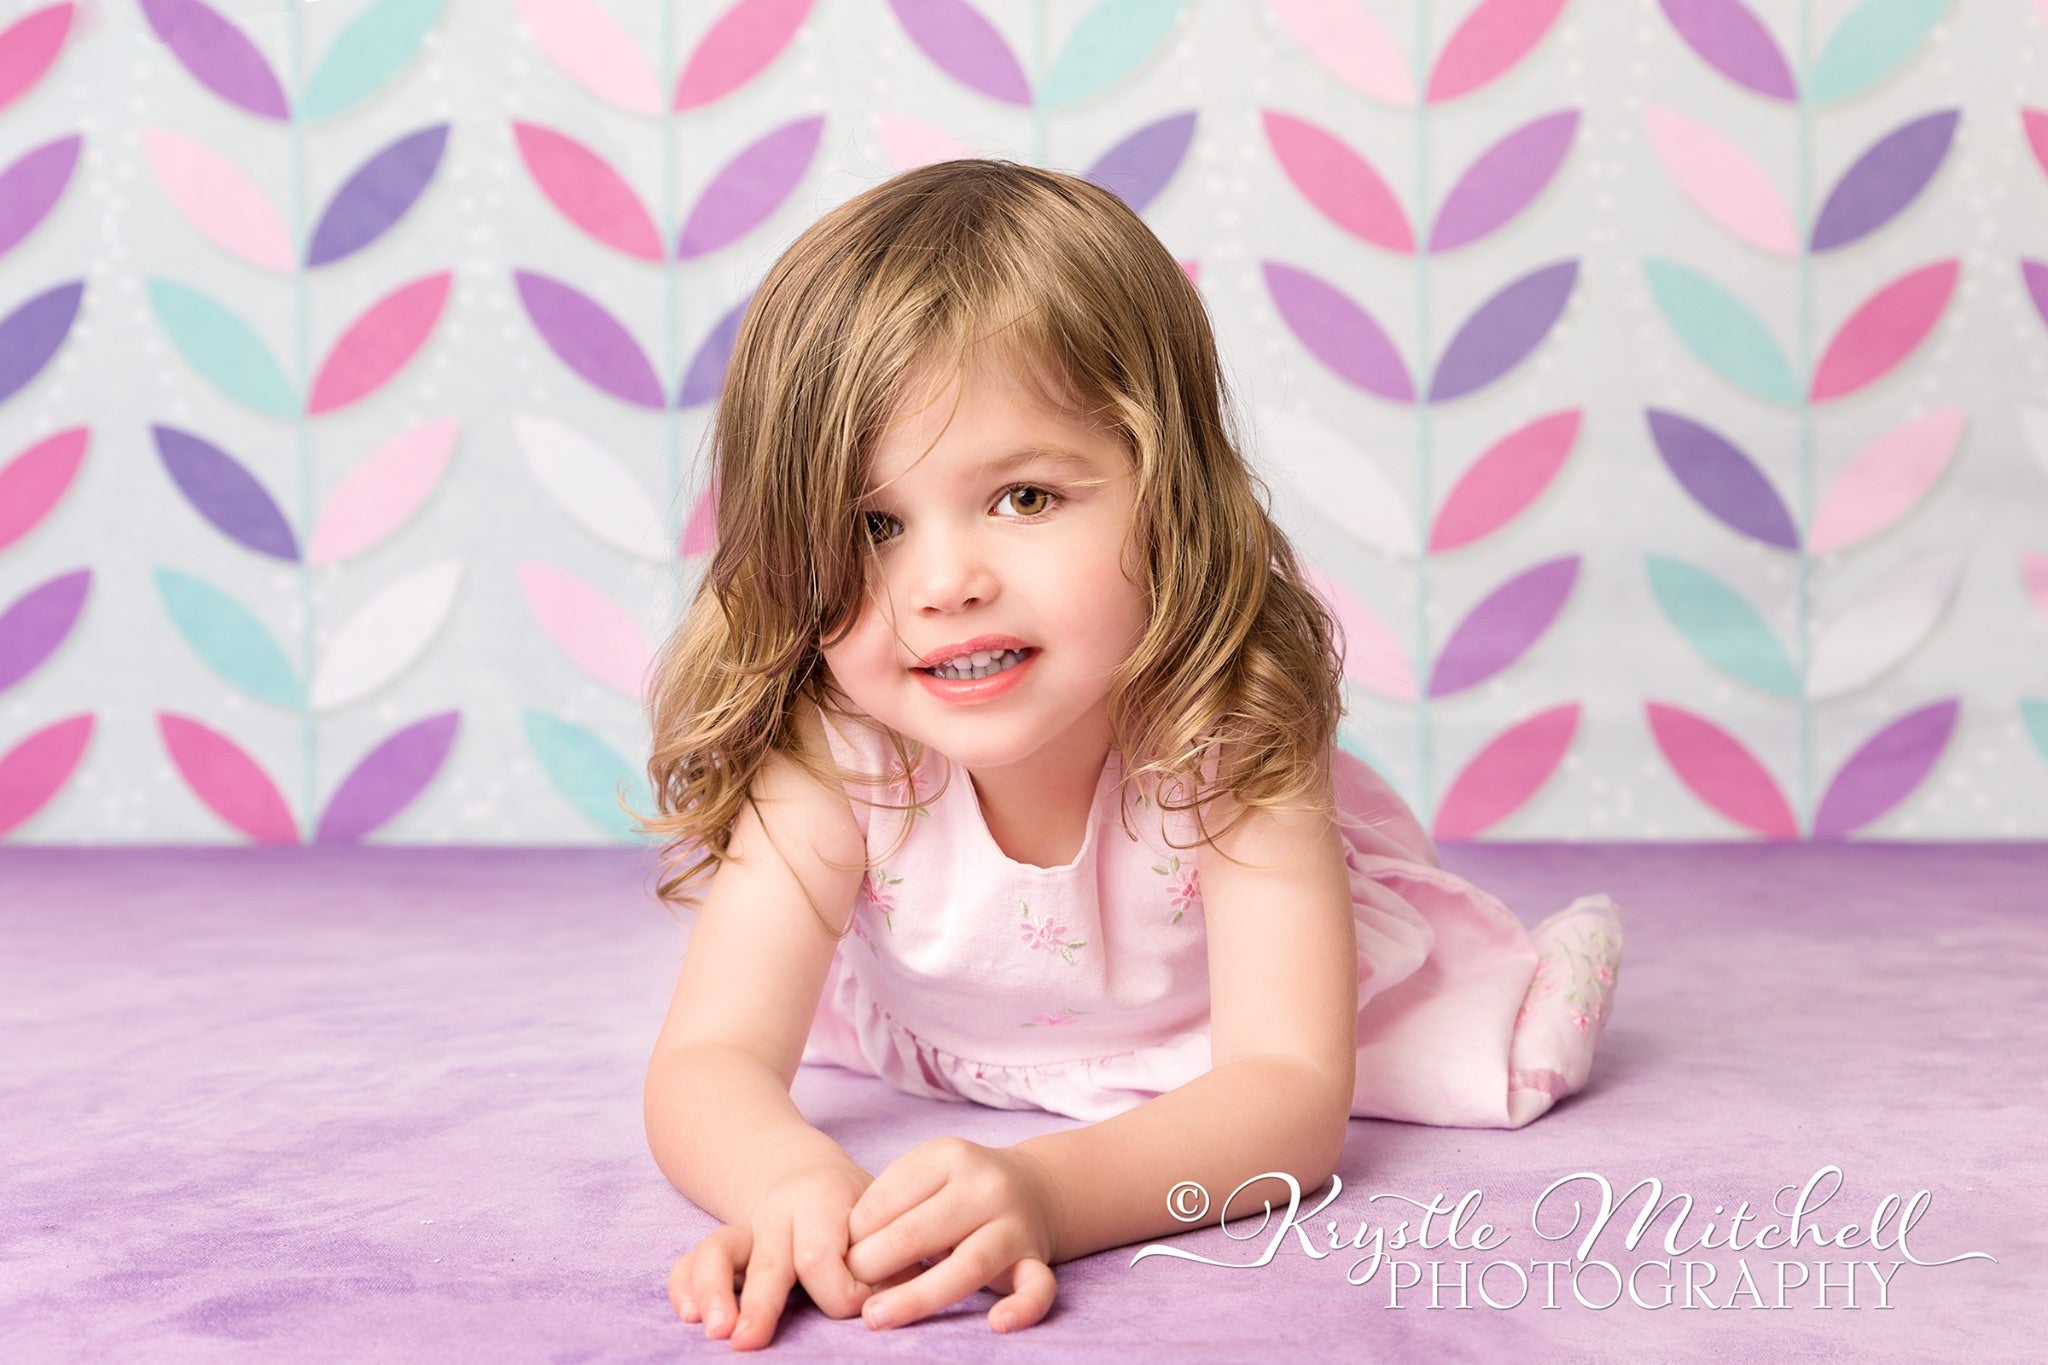 Kate Pretty Petals Girls Backdrop for Photography Designed by Krystle Mitchell Photography